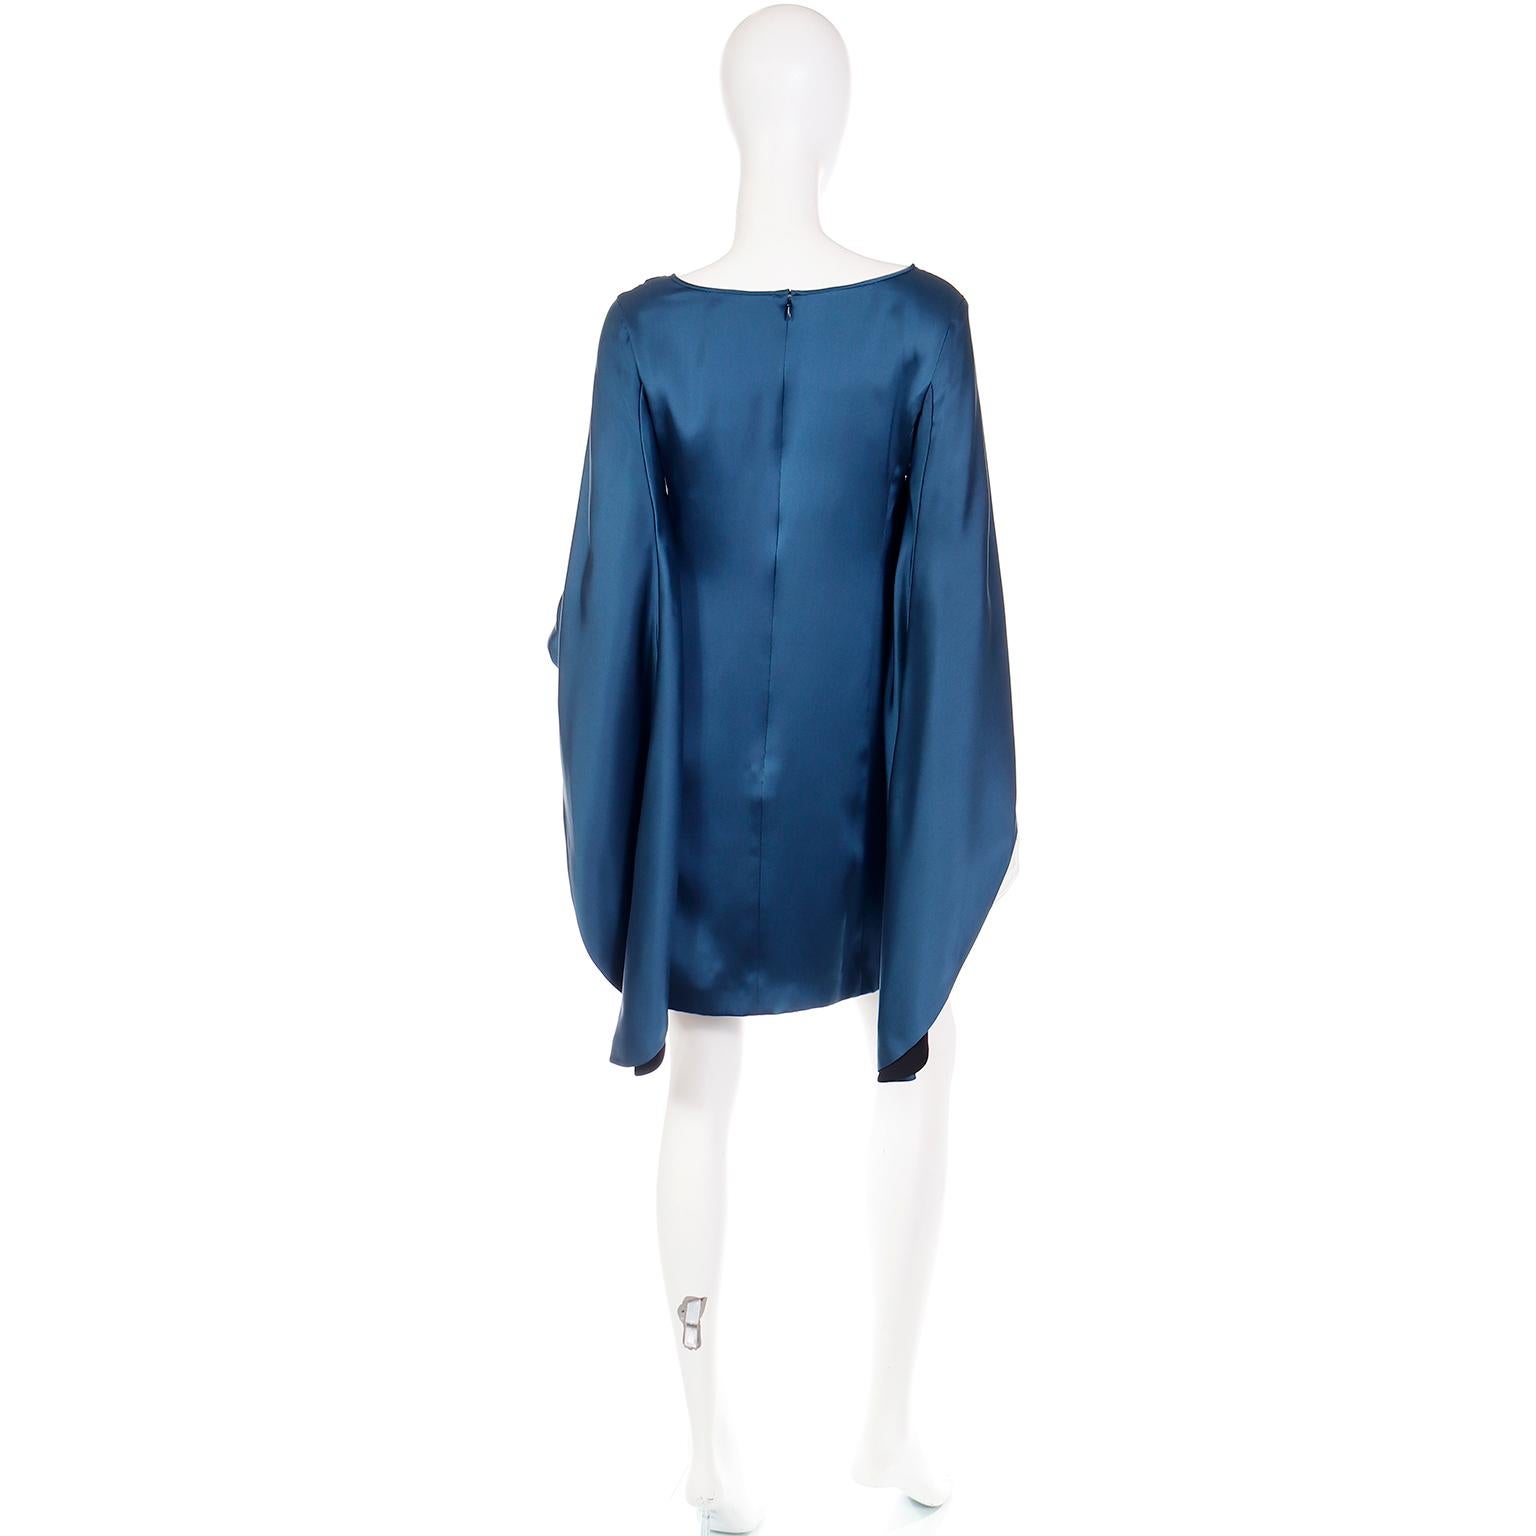 Yves Saint Laurent Deadstock Vintage Blue Silk Dress W Statement Sleeves In Excellent Condition For Sale In Portland, OR